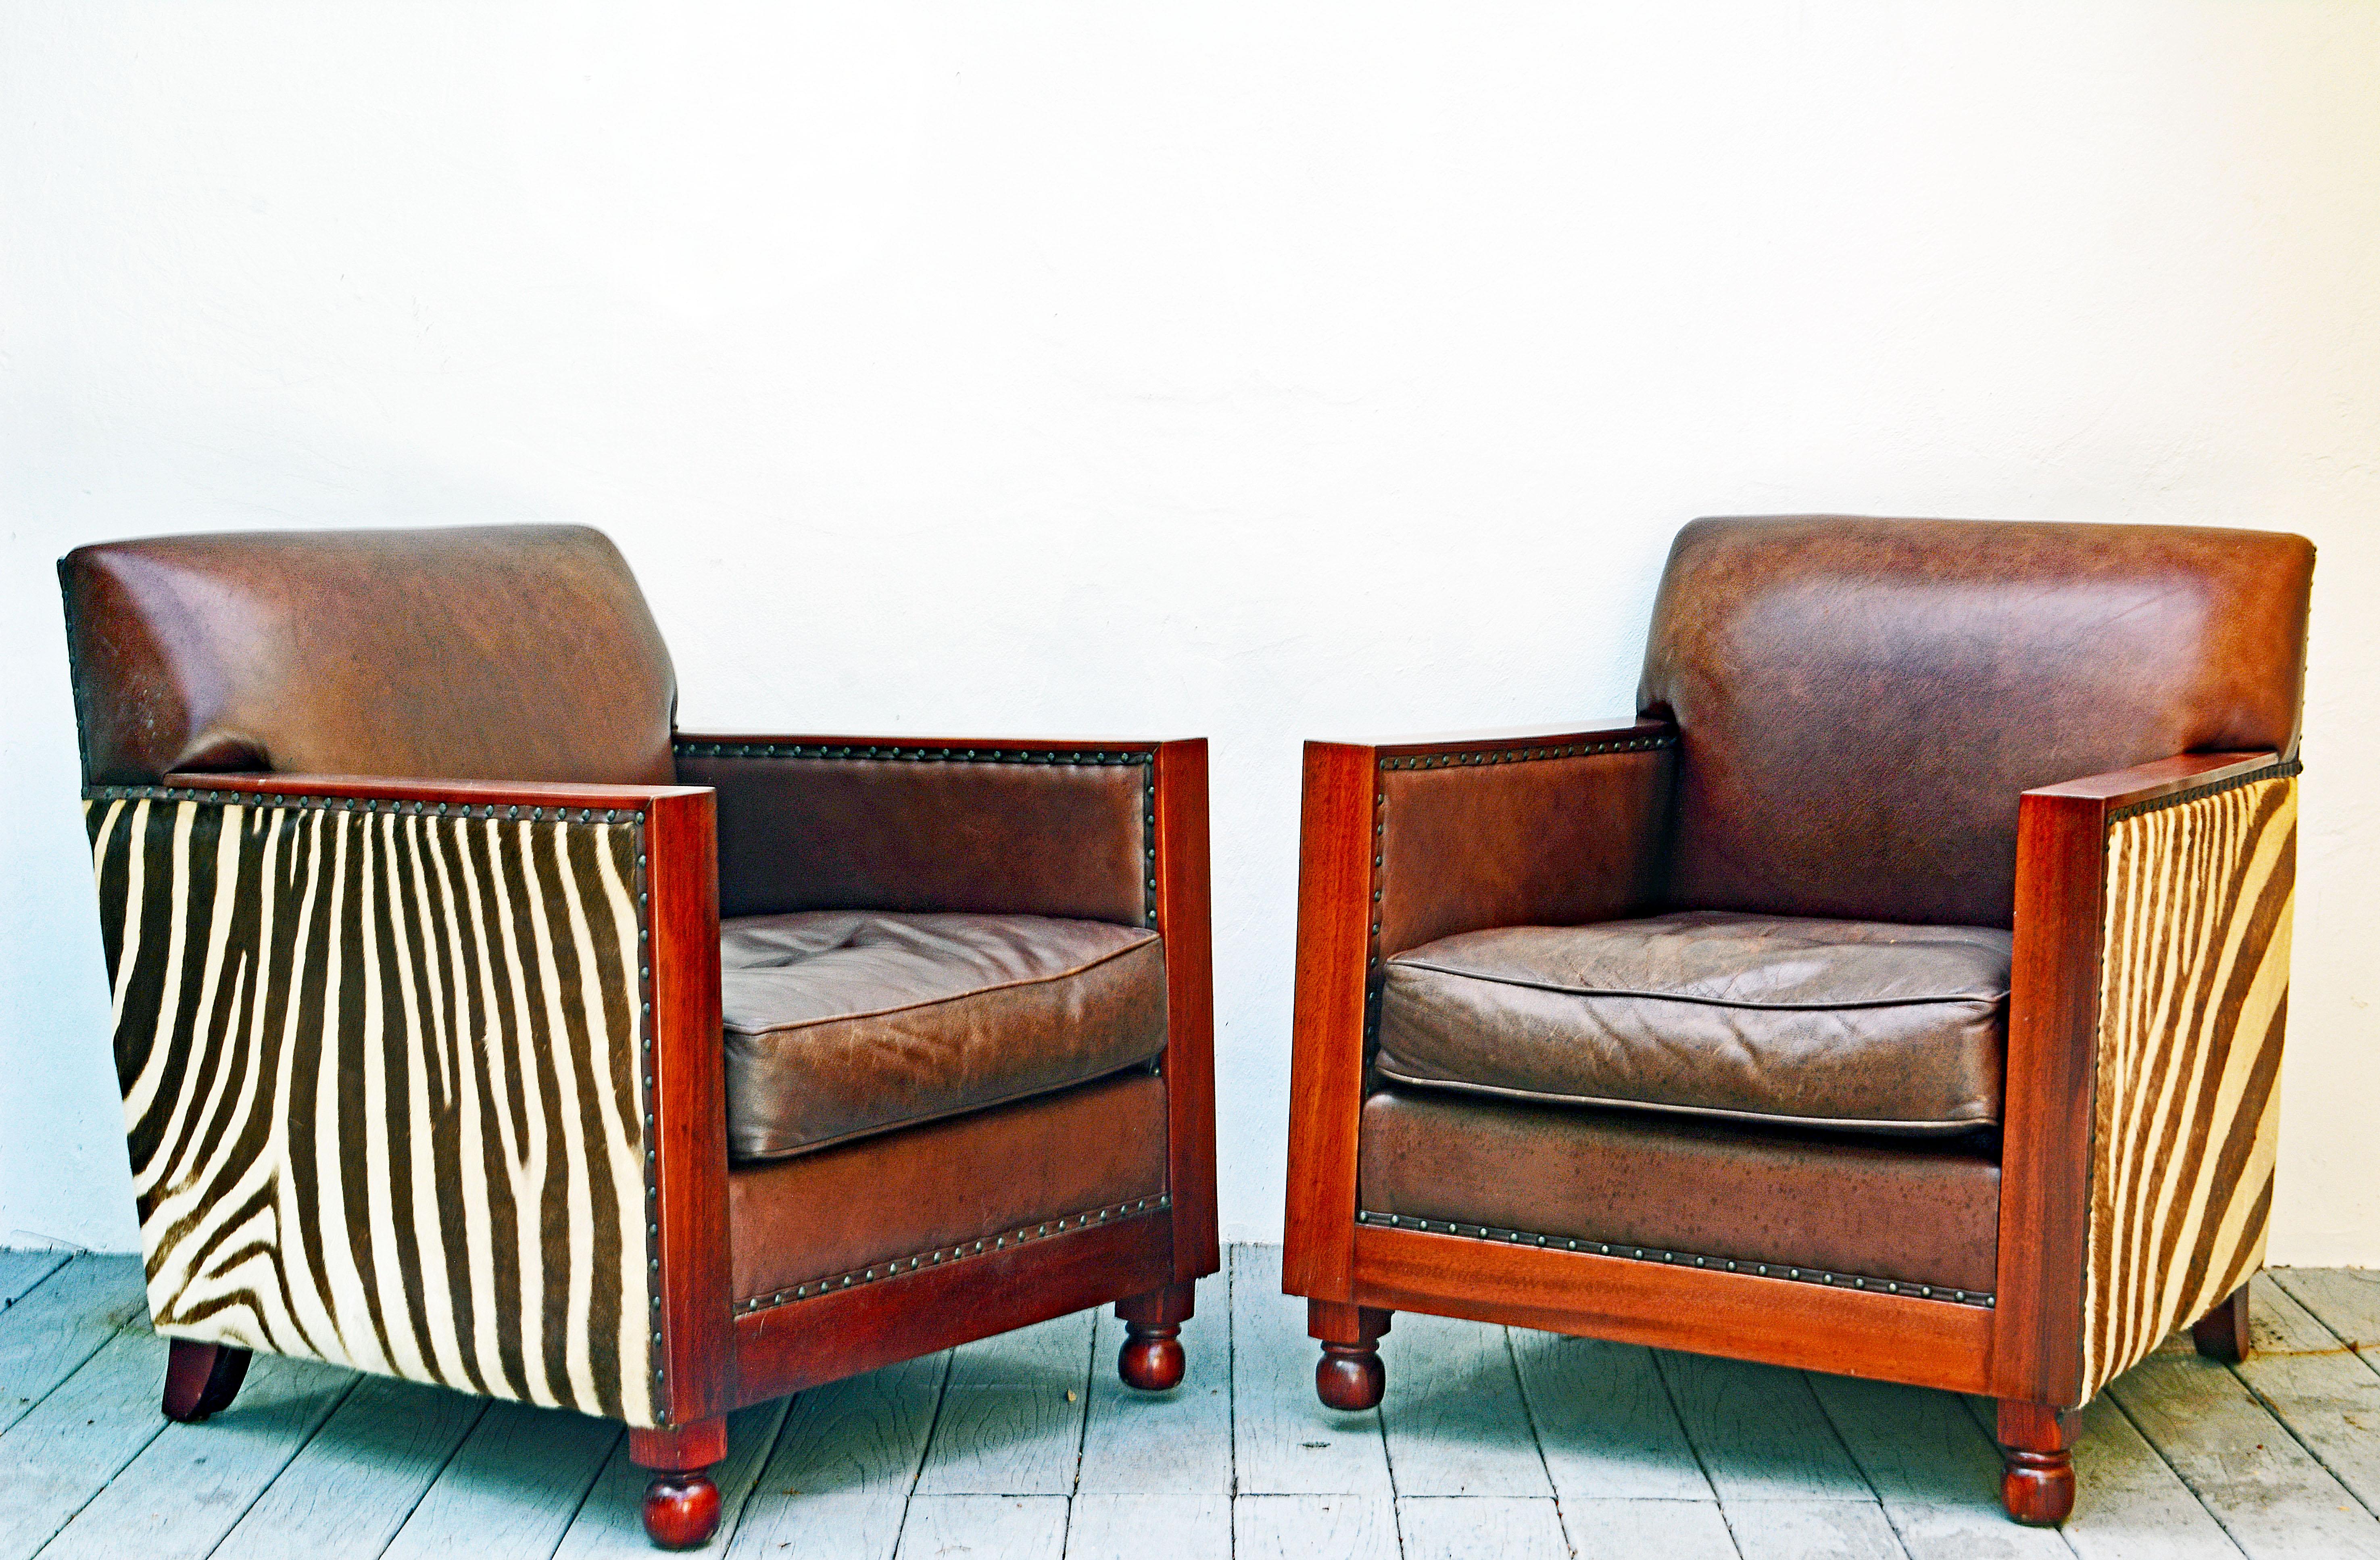 This pair of British Colonial style art deco inspired club chairs feature the very best craftsmanship and materials. The select zebra skin covered sides have great patterns and are chosen from the parts of the hide. The leather covered seats,